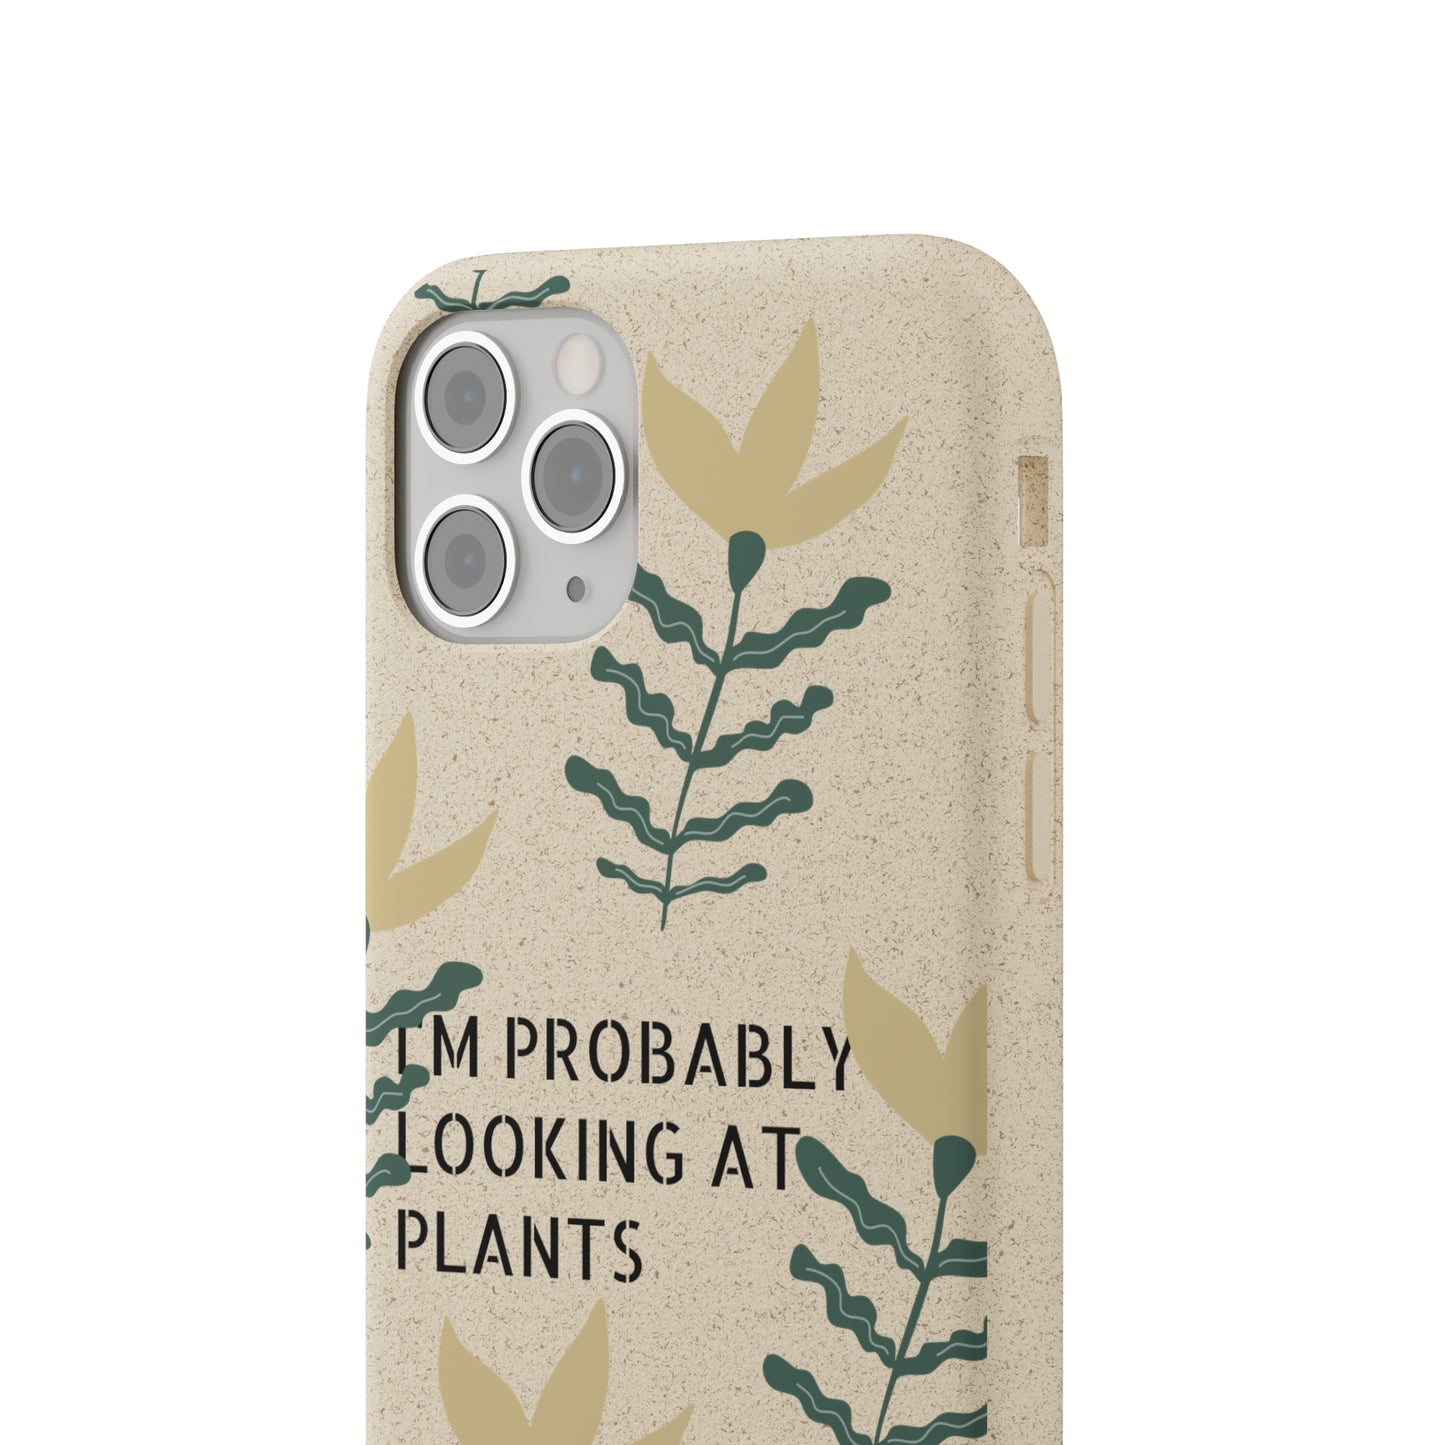 "I'm Probably looking at Plants" Biodegradable Cases